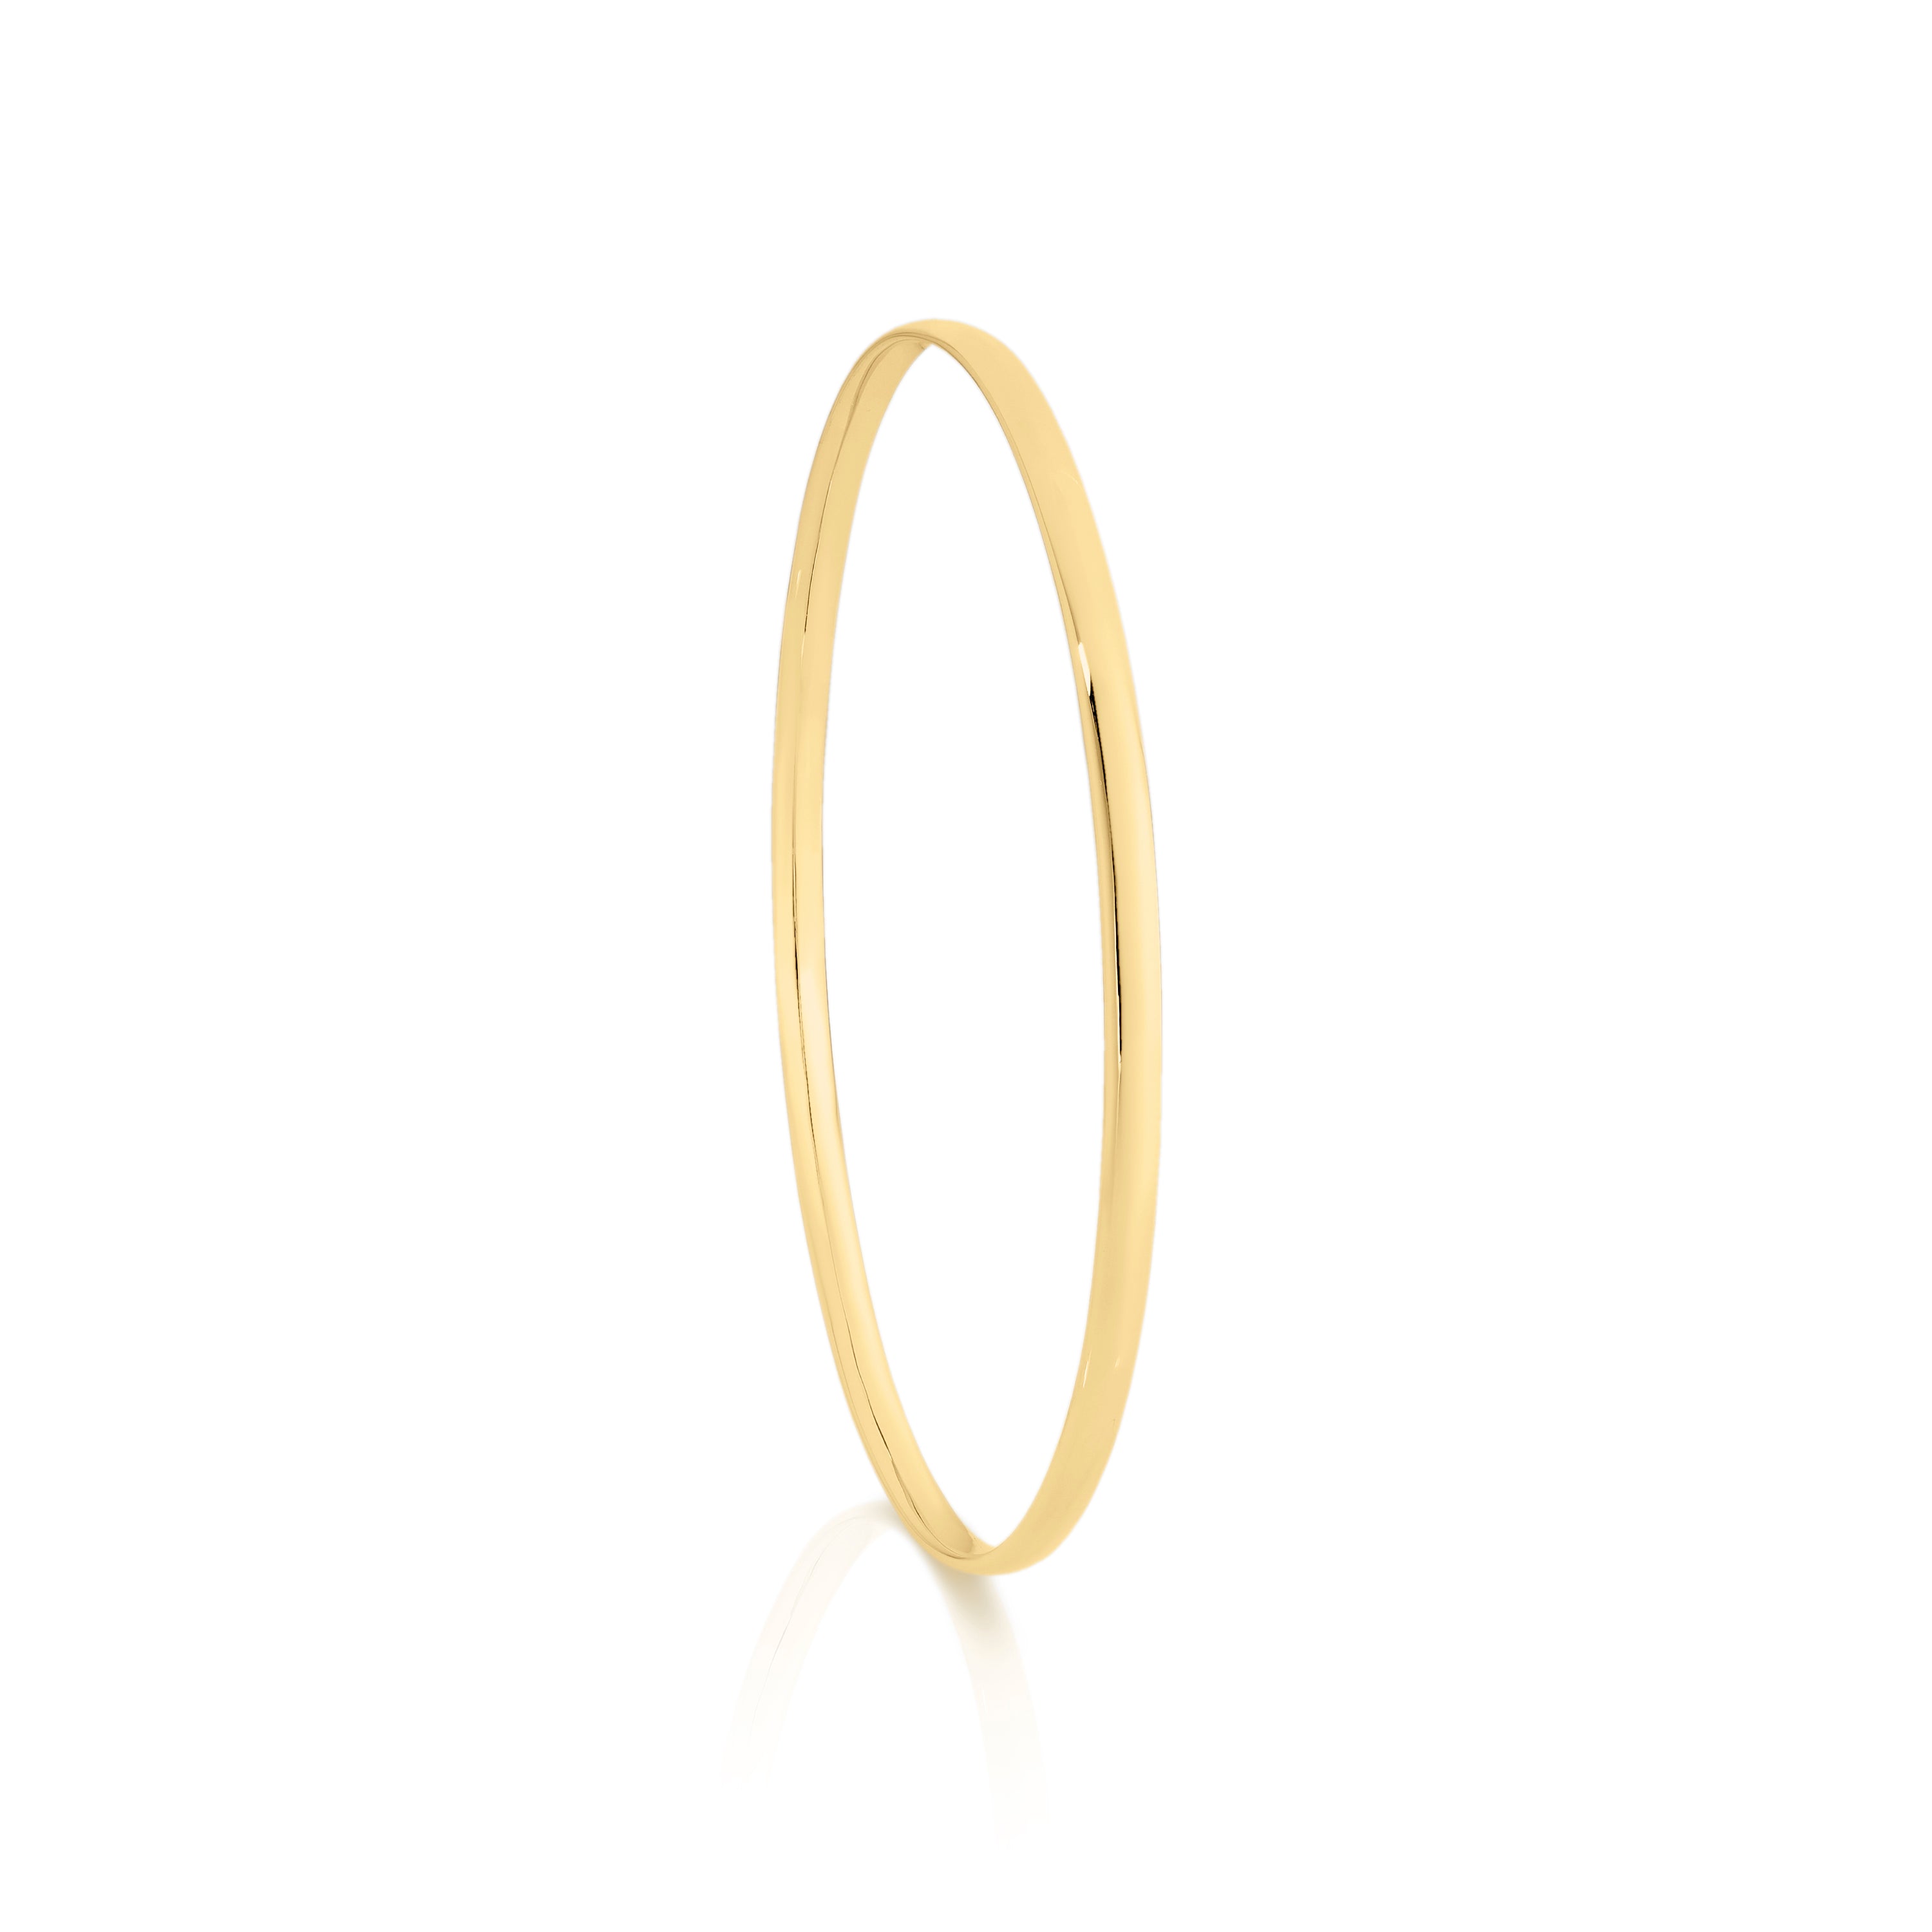 9ct gold 3mm oval bangle